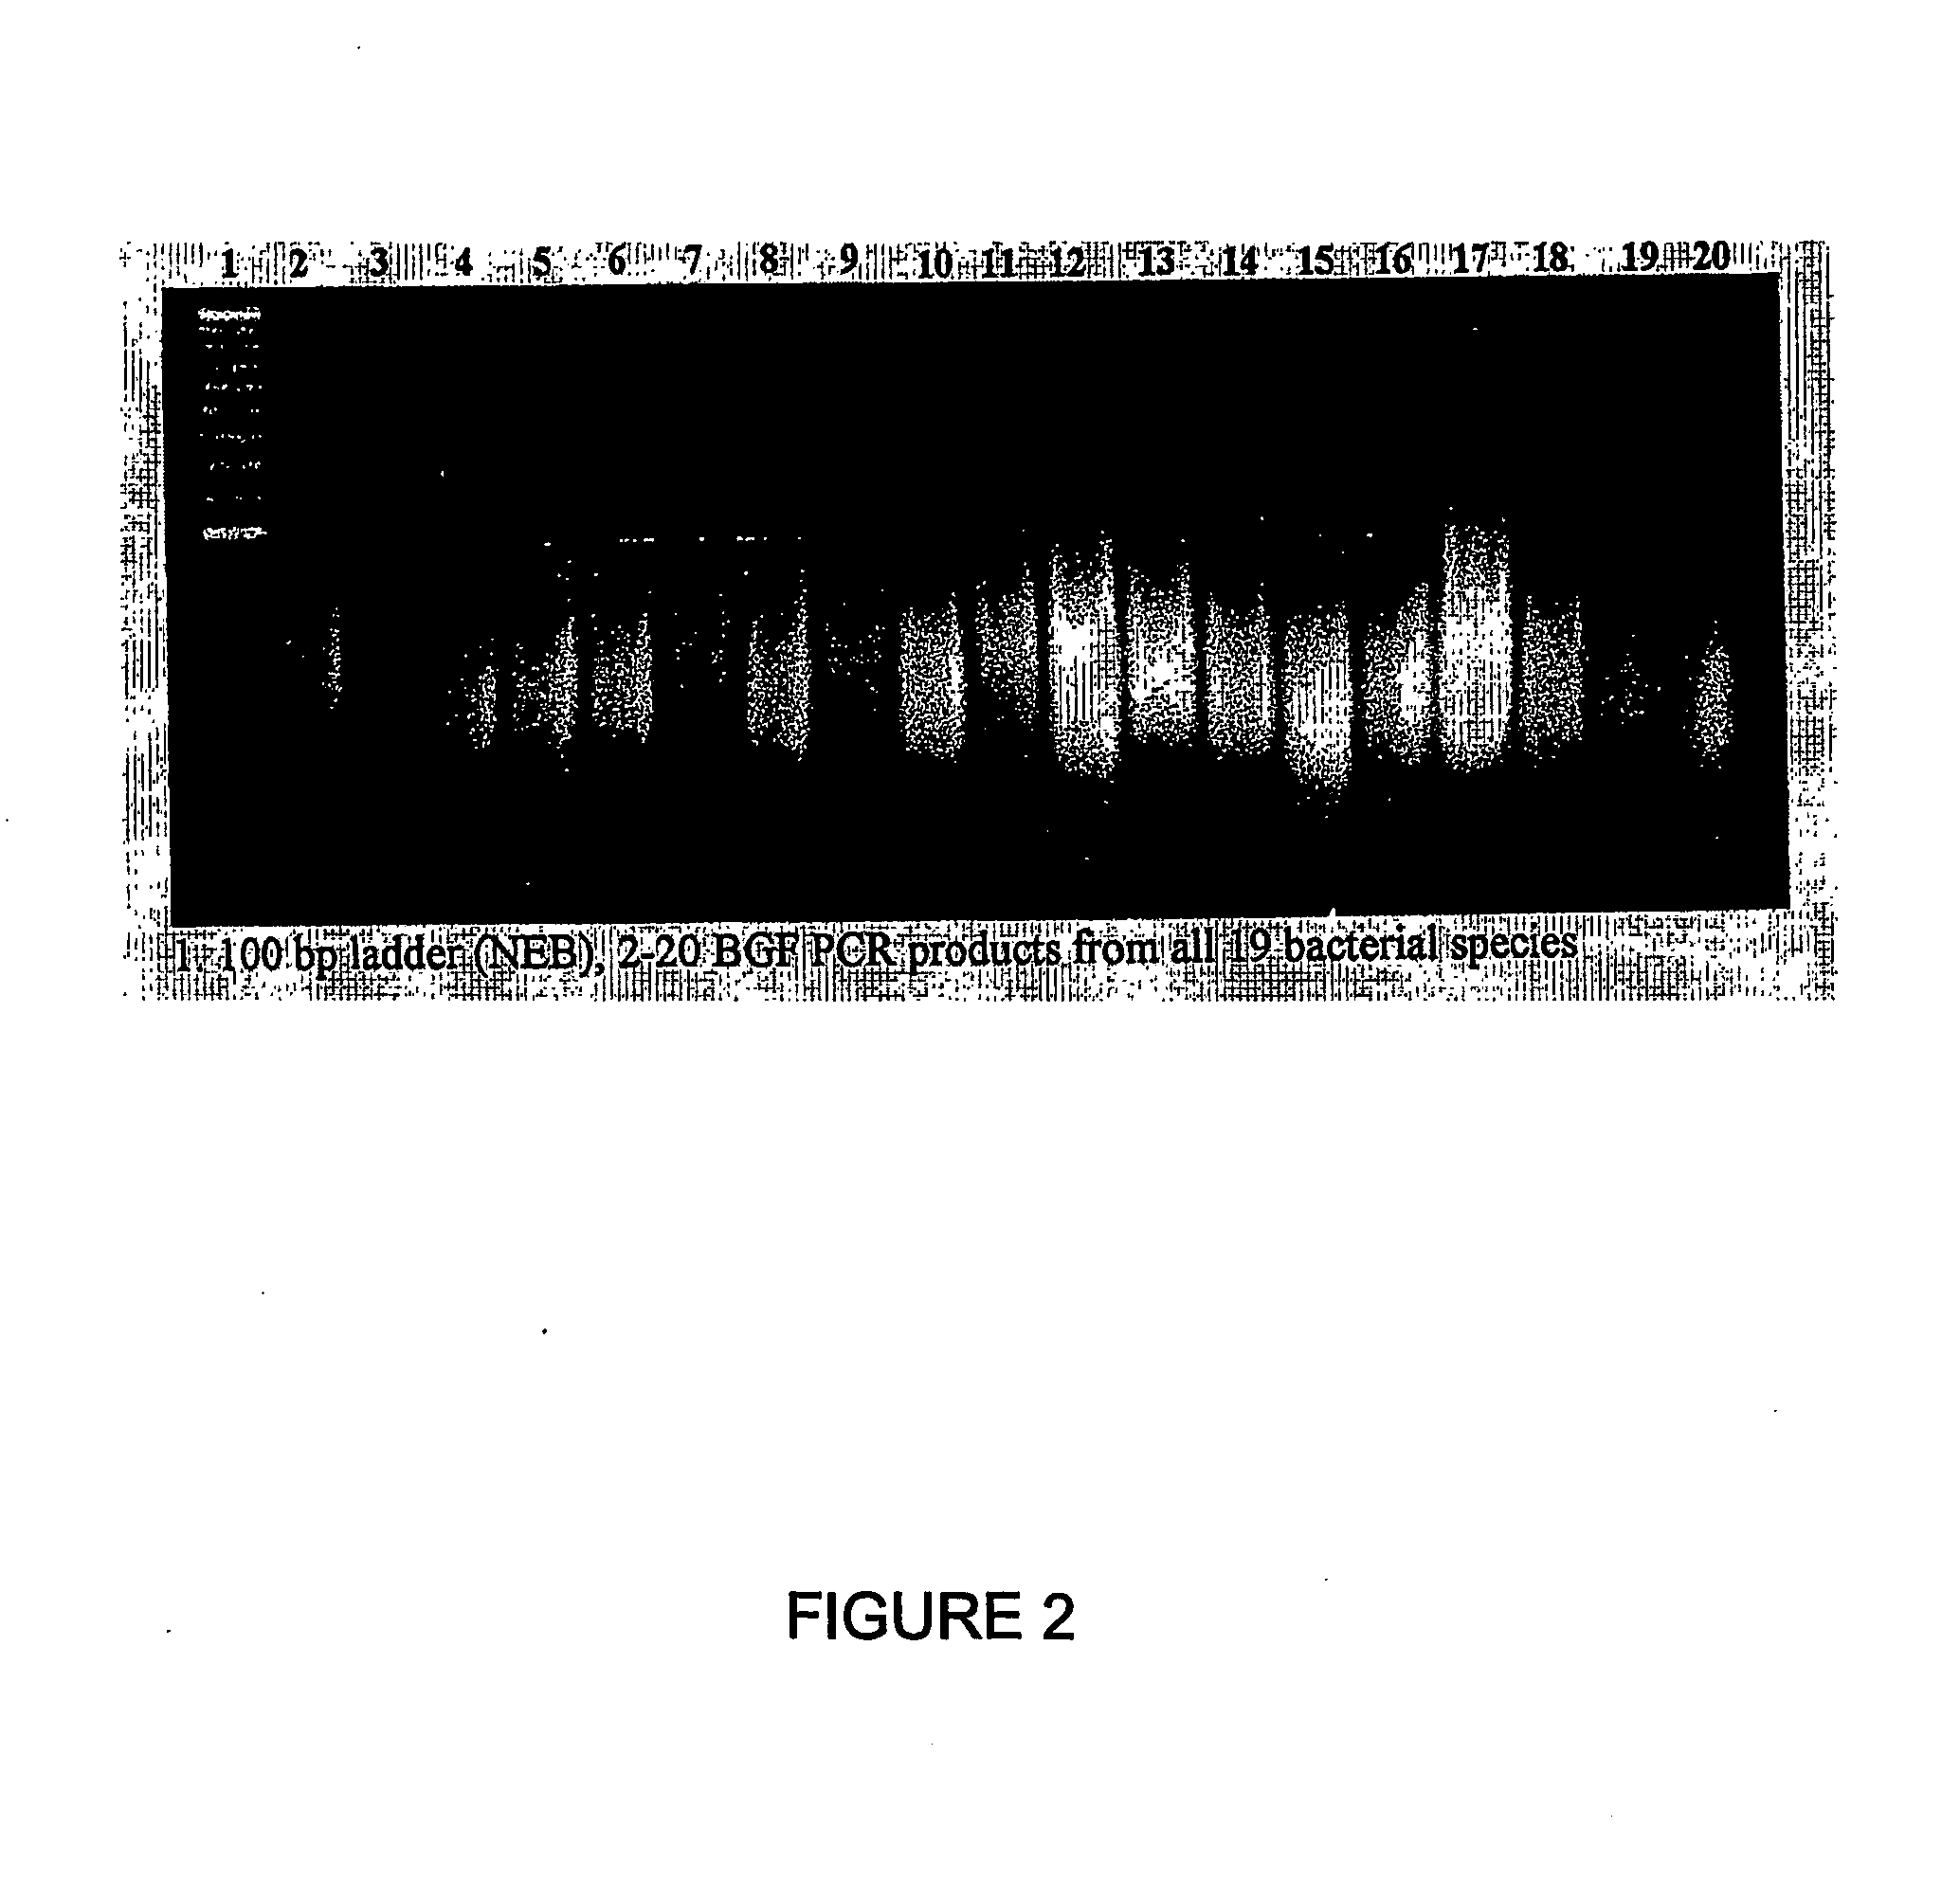 Methods of constructing biodiverse gene fragment libraries and biological modulators isolated therefrom